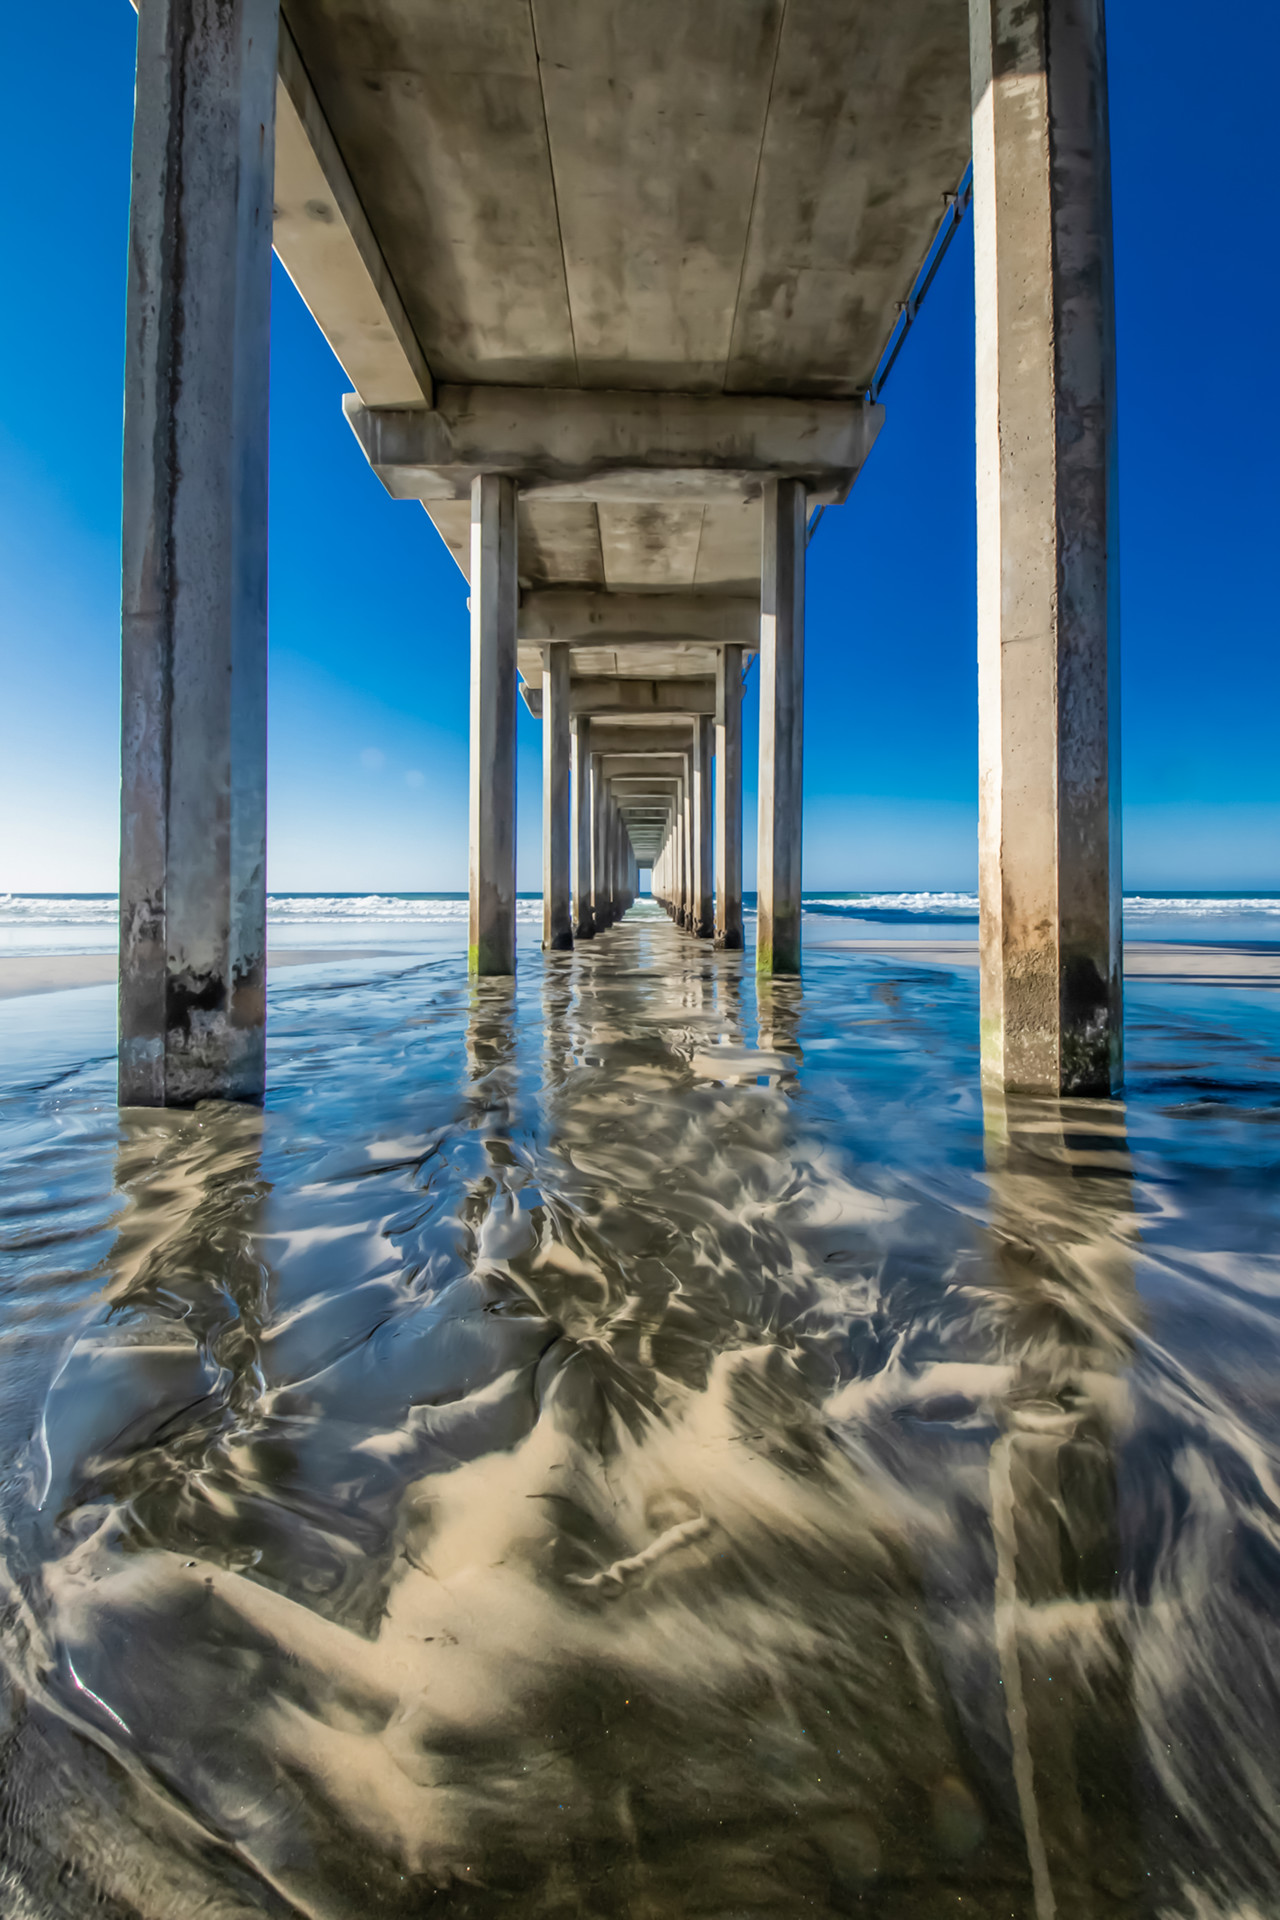 underneath the pier, looking down the length of the pier, water creates designs in the sand